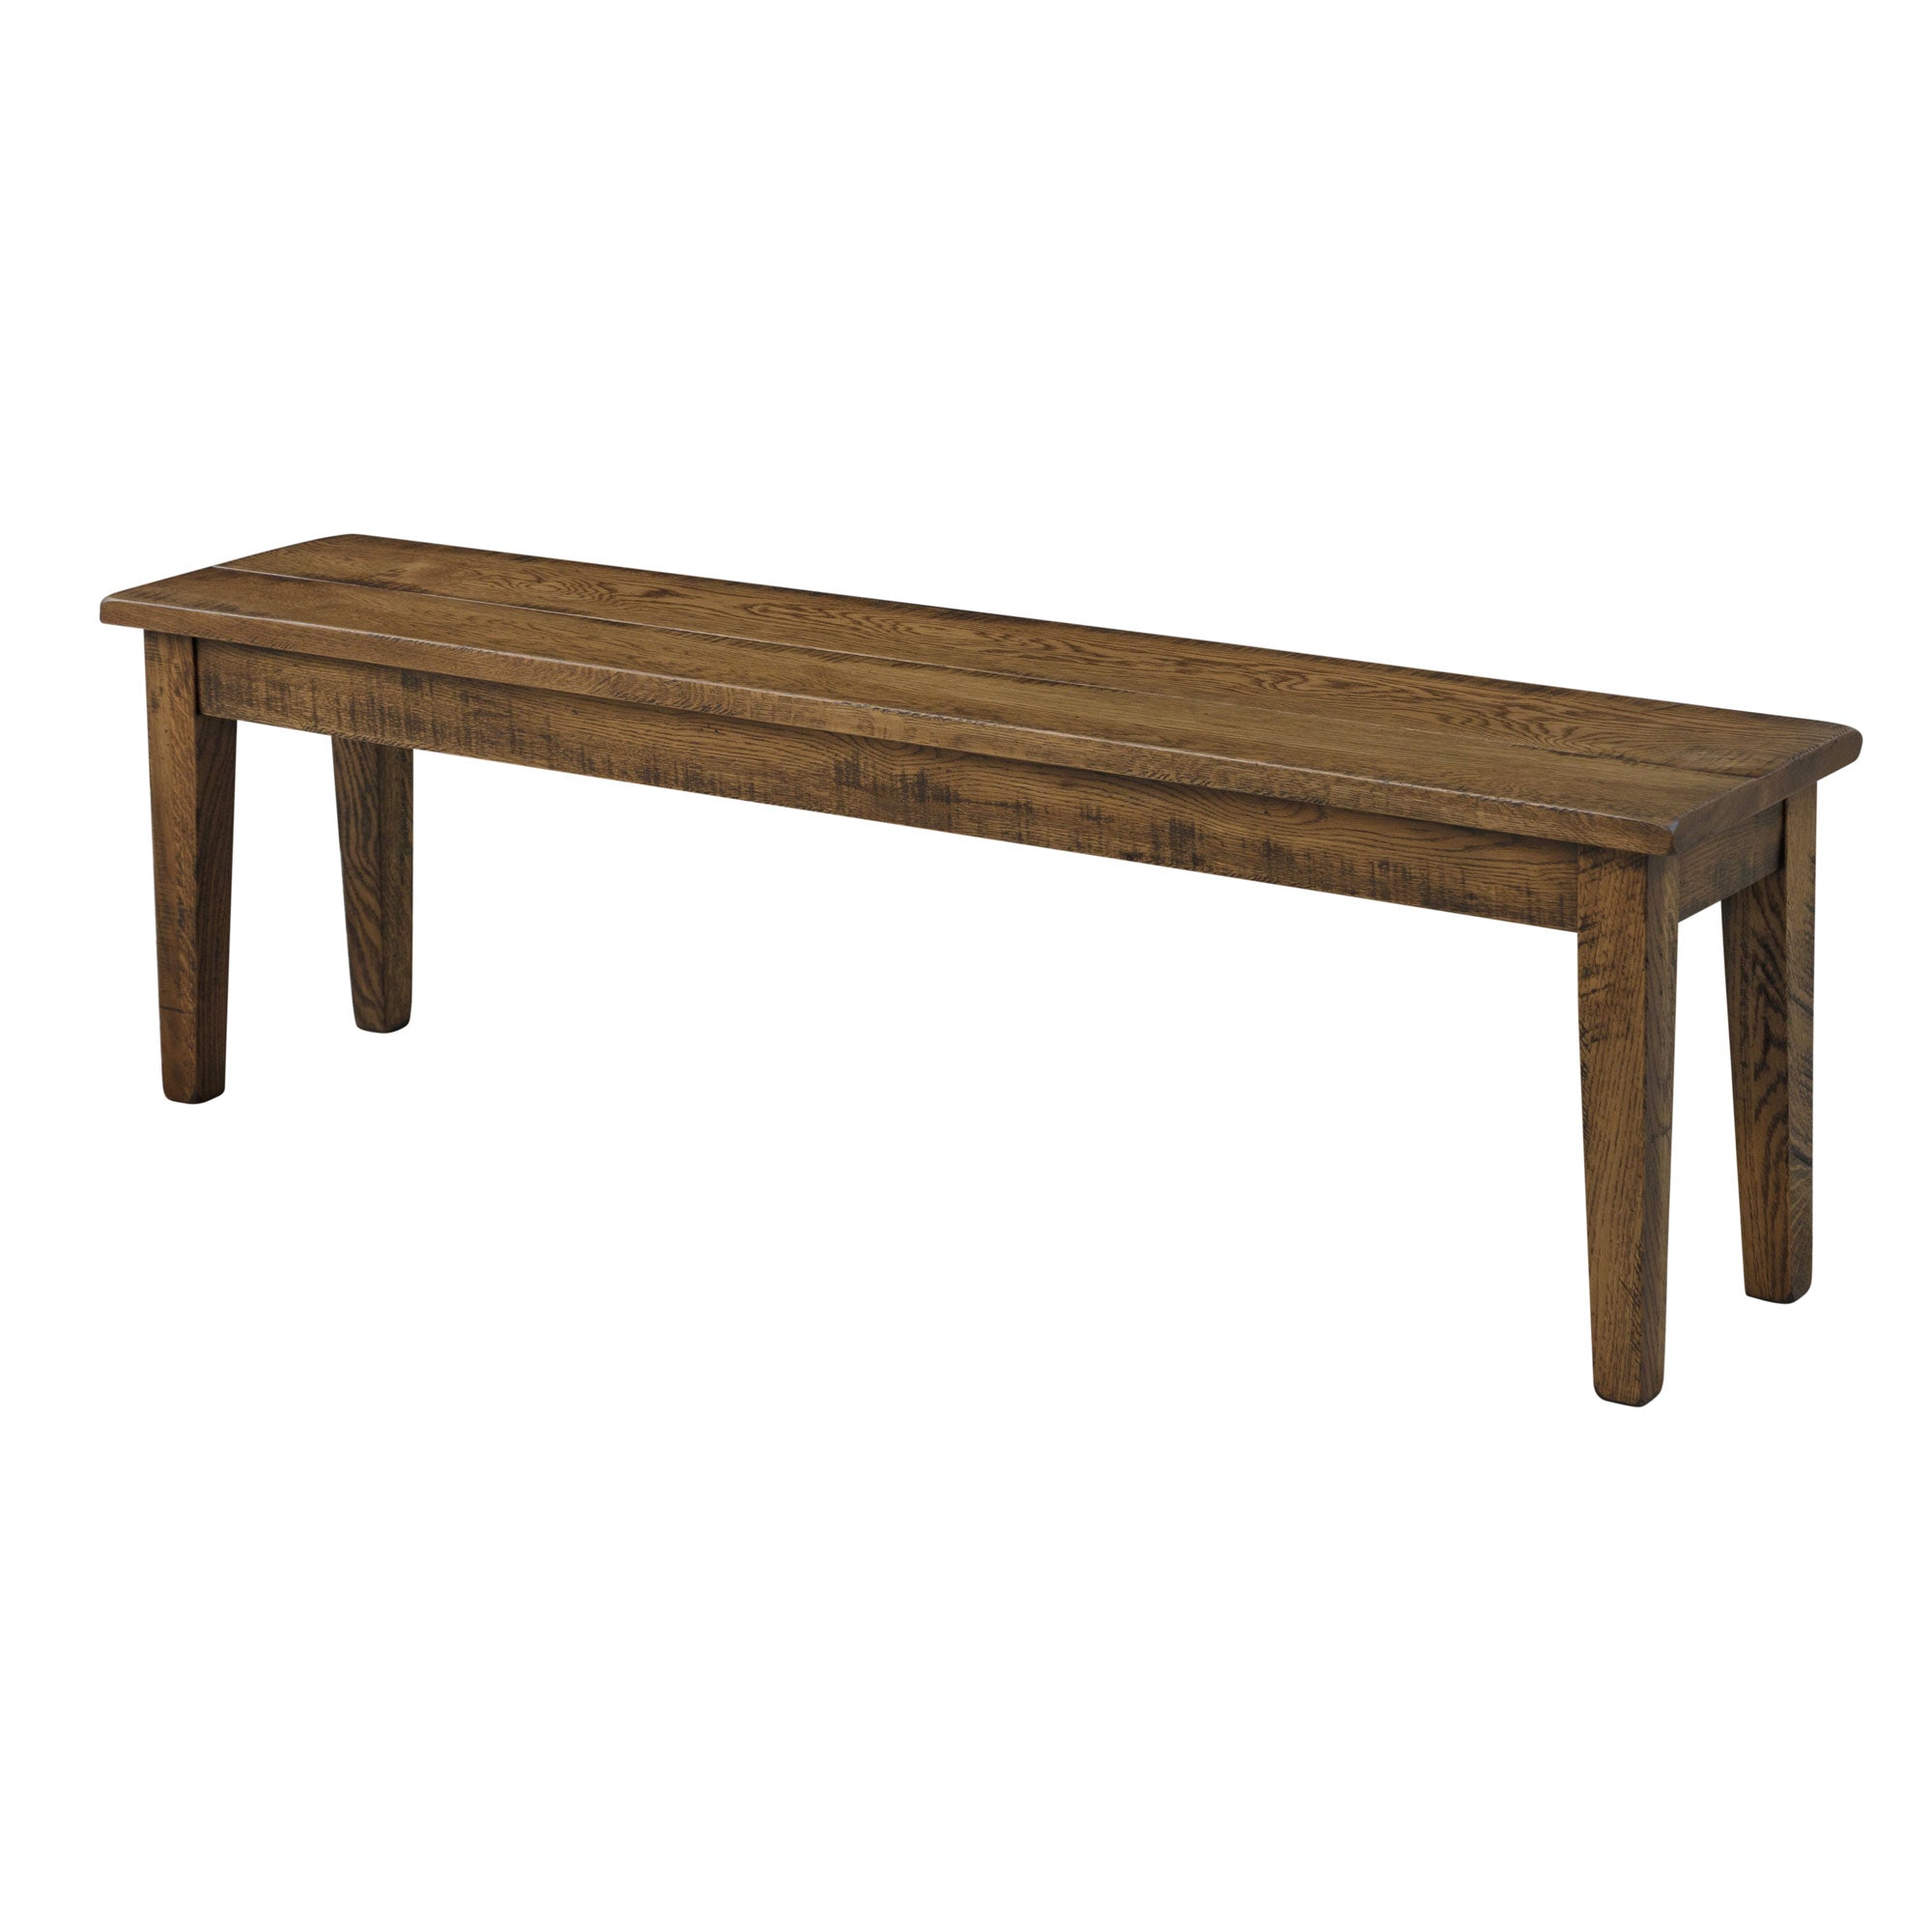 Amish Shaker Solid Wood Dining Room Bench - snyders.furniture